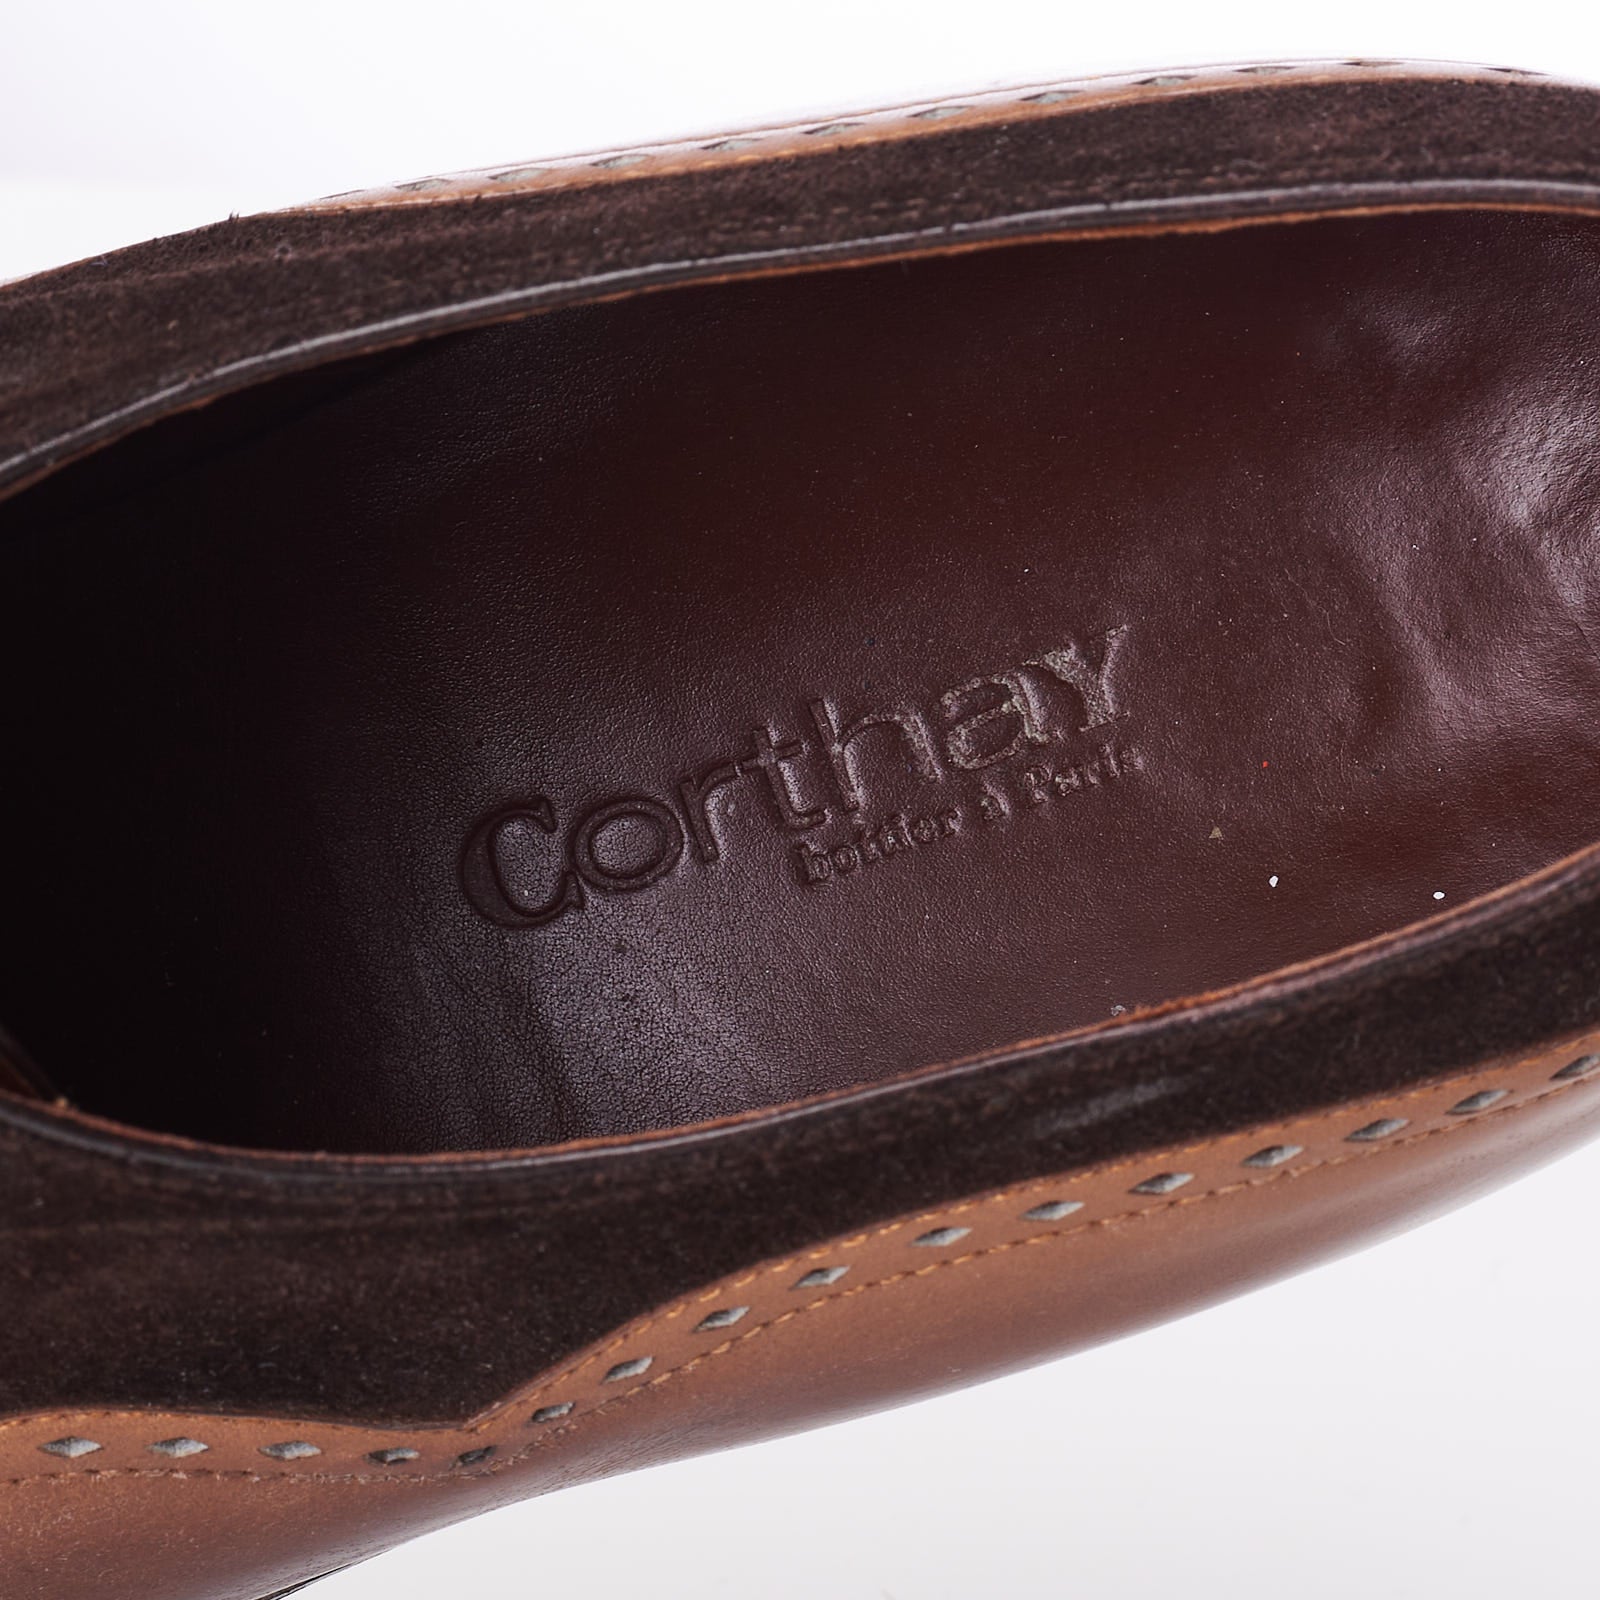 CORTHAY Paris "Wilfrid" Ebony Brown Suede Calf Leather 5 Eyelet Oxford Shoes Size 7.5 CORTHAY